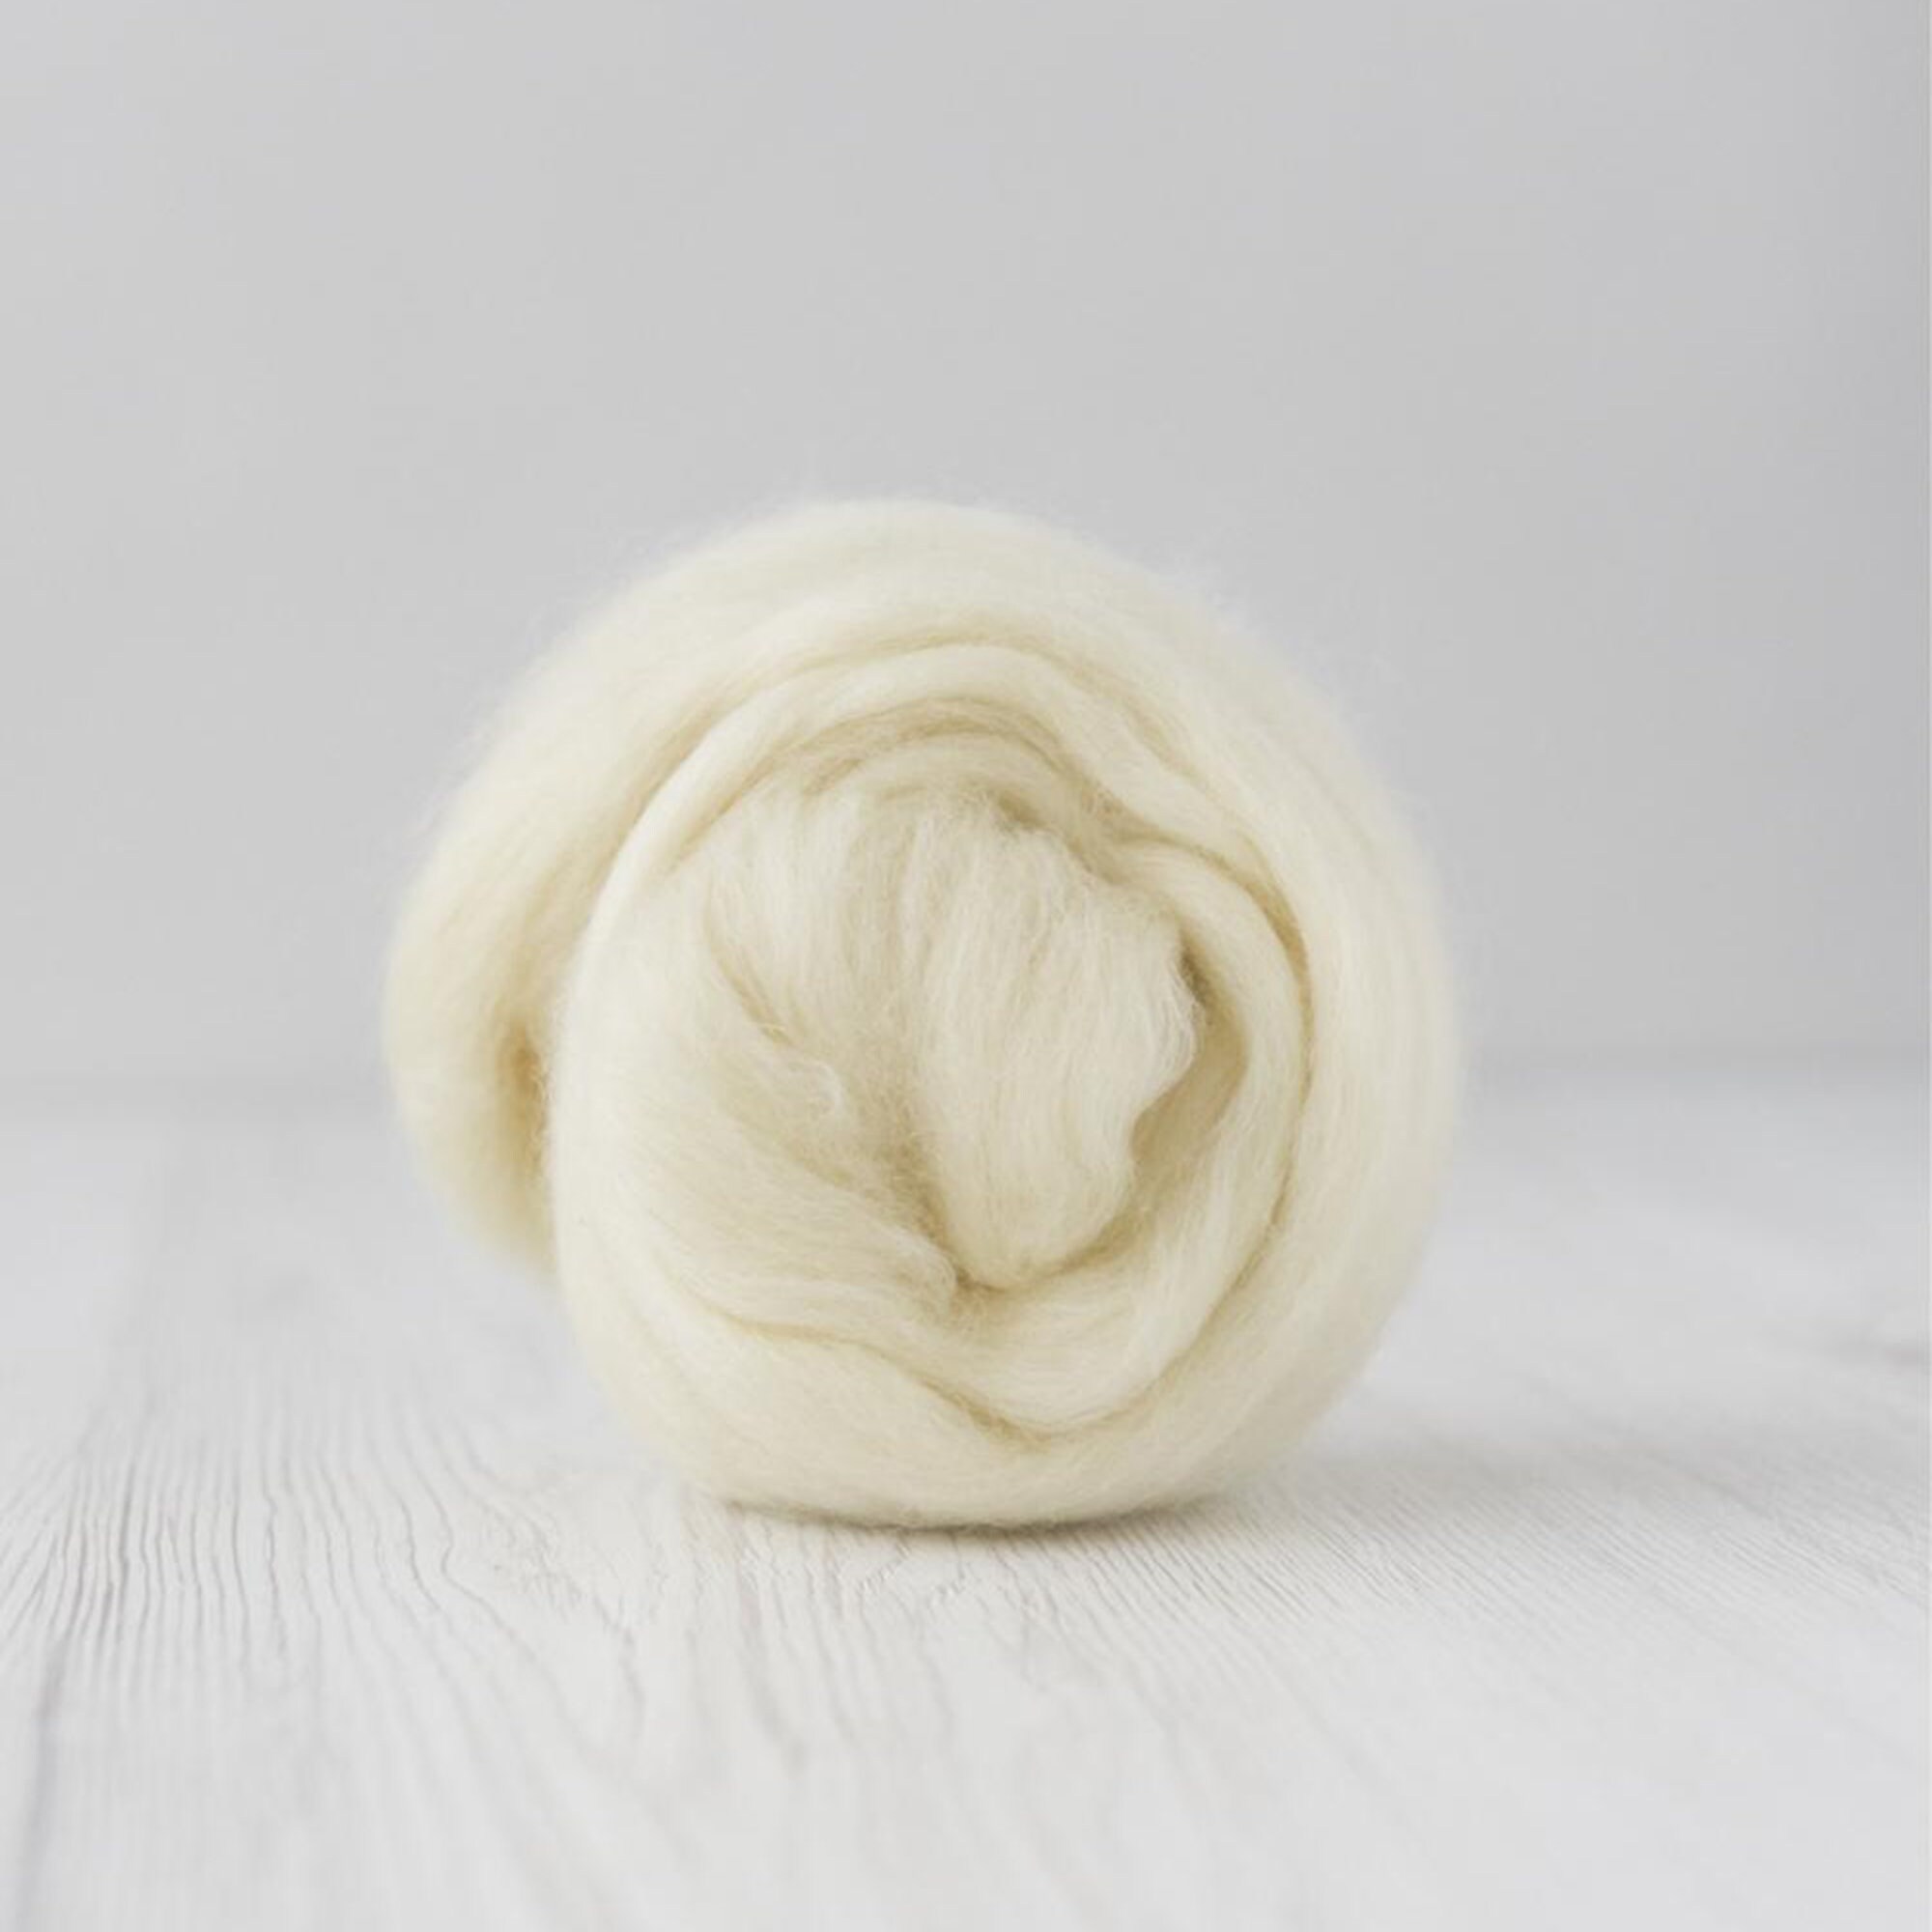 Wet Felting Spinning and Weaving Perfect for DIY Crafts. Odorless & Non-Toxic Super Soft Roving is Ideal for Needle Felting Natural Merino Wool Fiber by DHG Etoile 1 OZ 